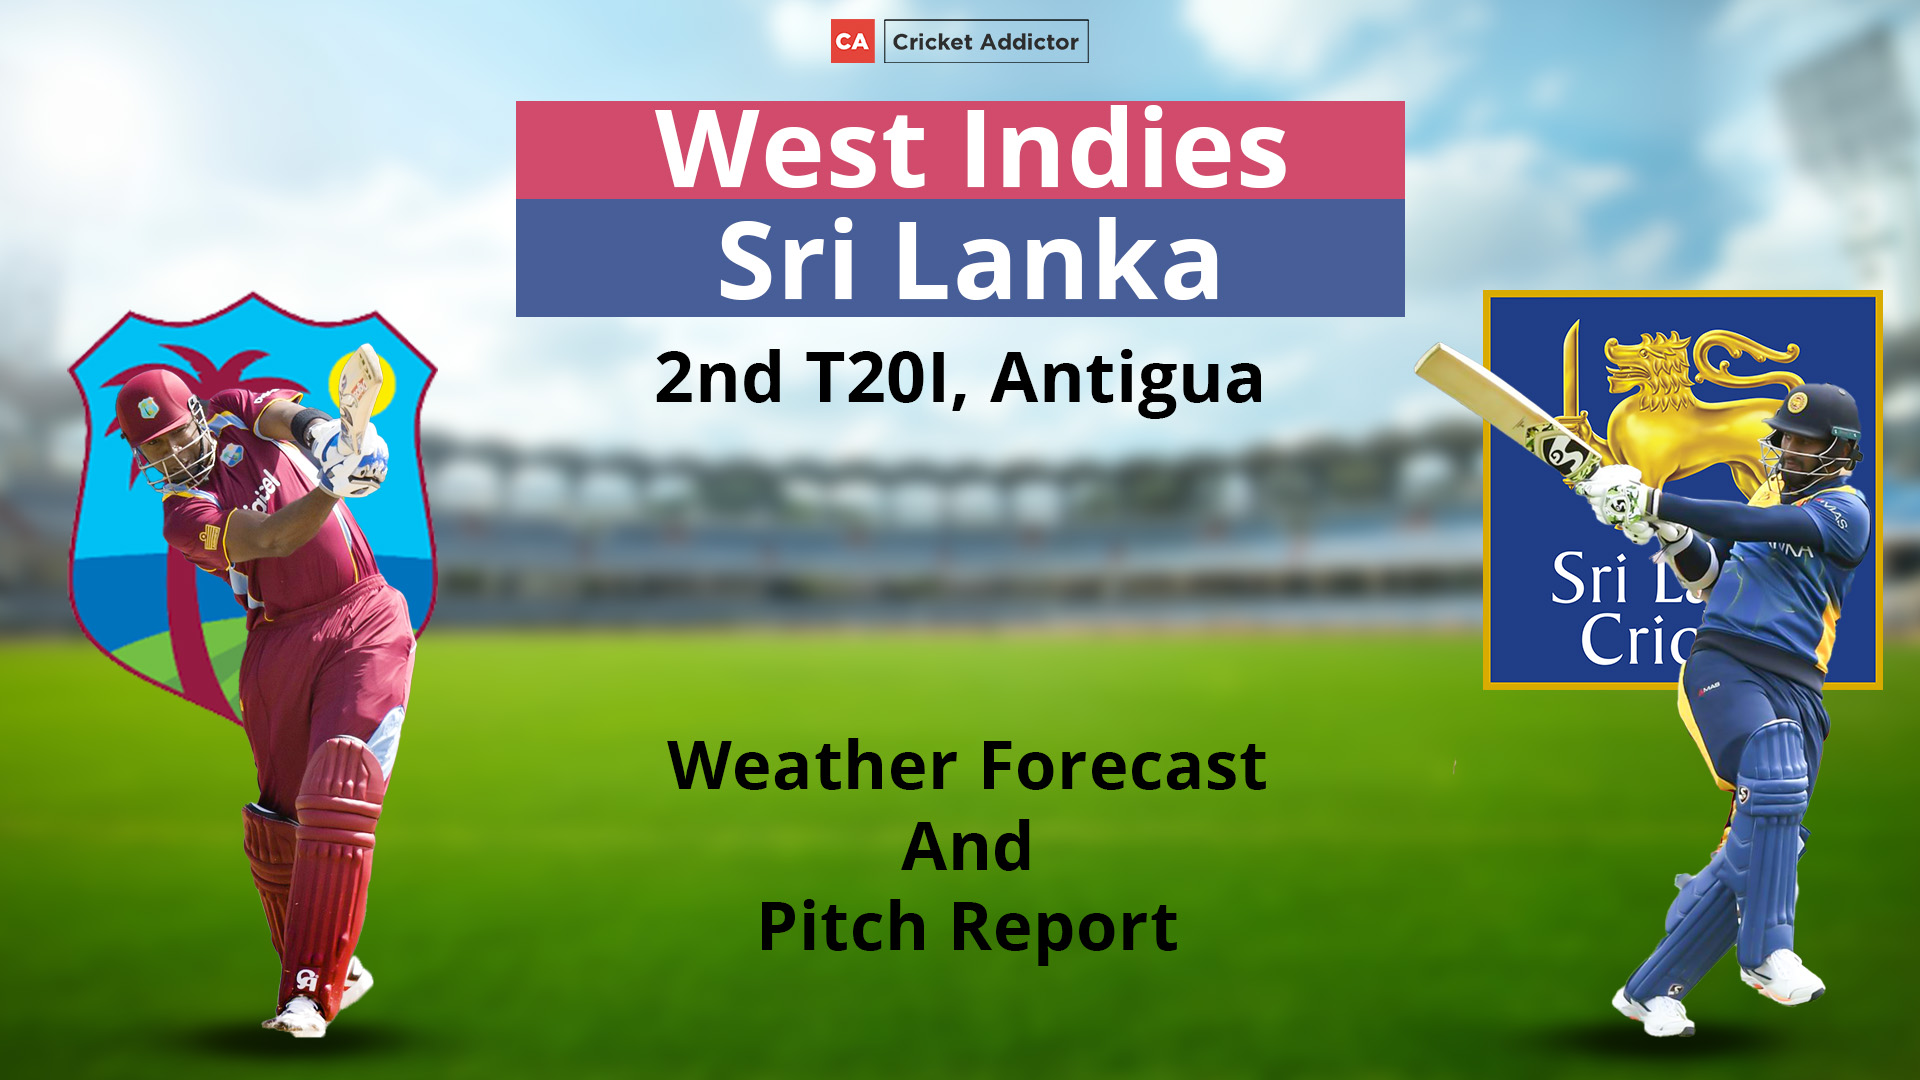 West Indies vs Sri Lanka 2021, 2nd T20I: Weather Forecast And Pitch Report